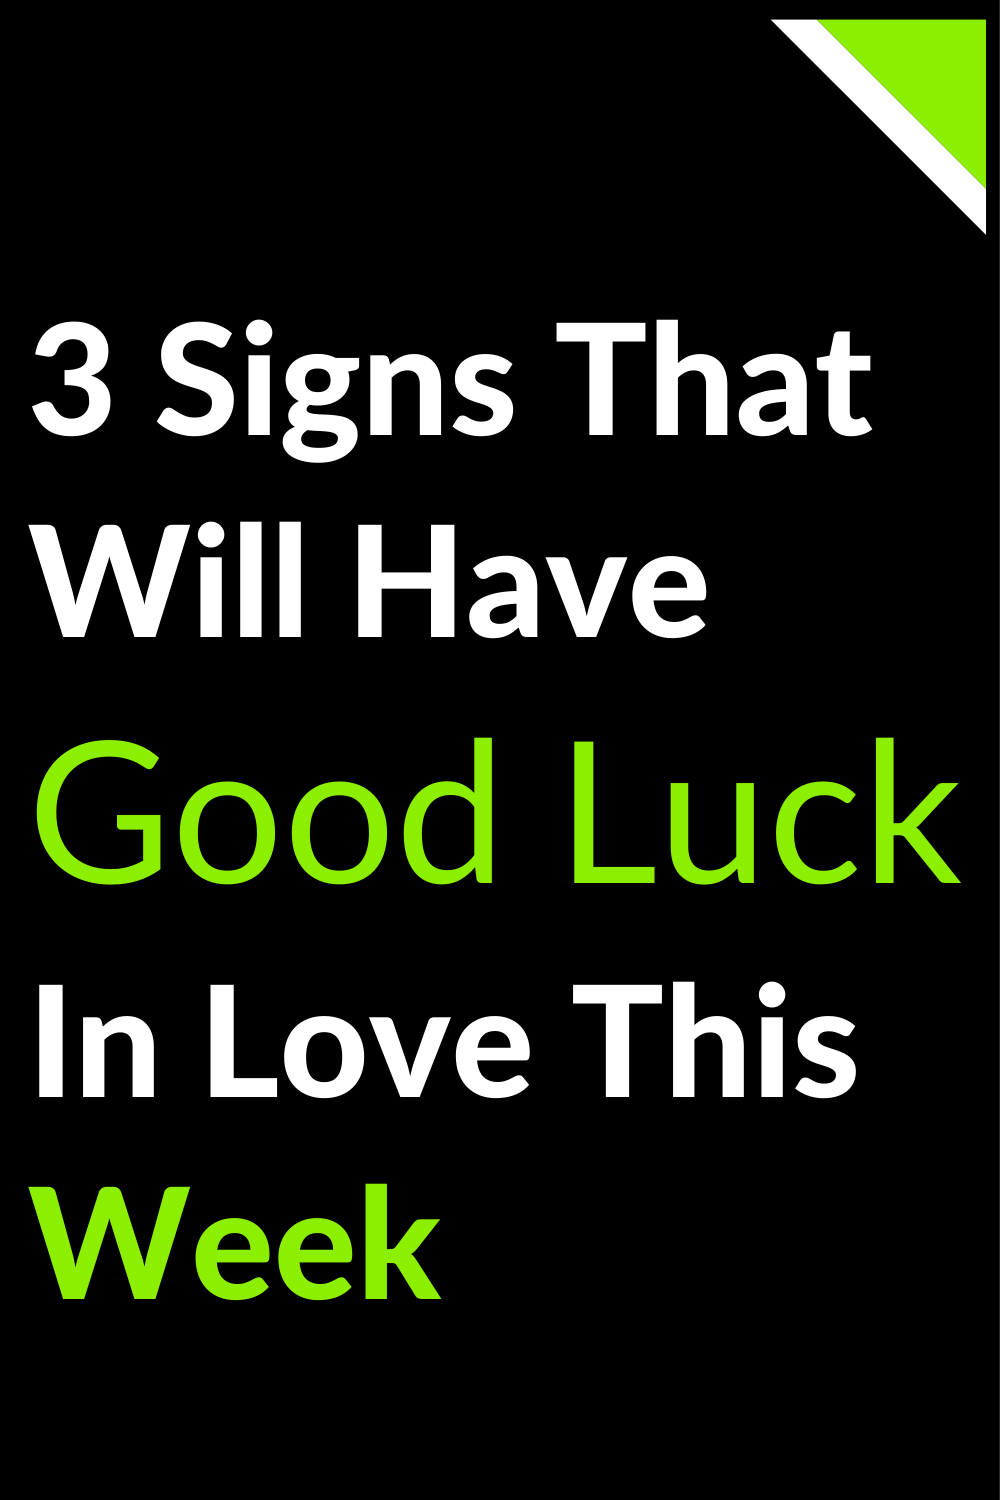 3 Signs That Will Have Good Luck In Love This Week